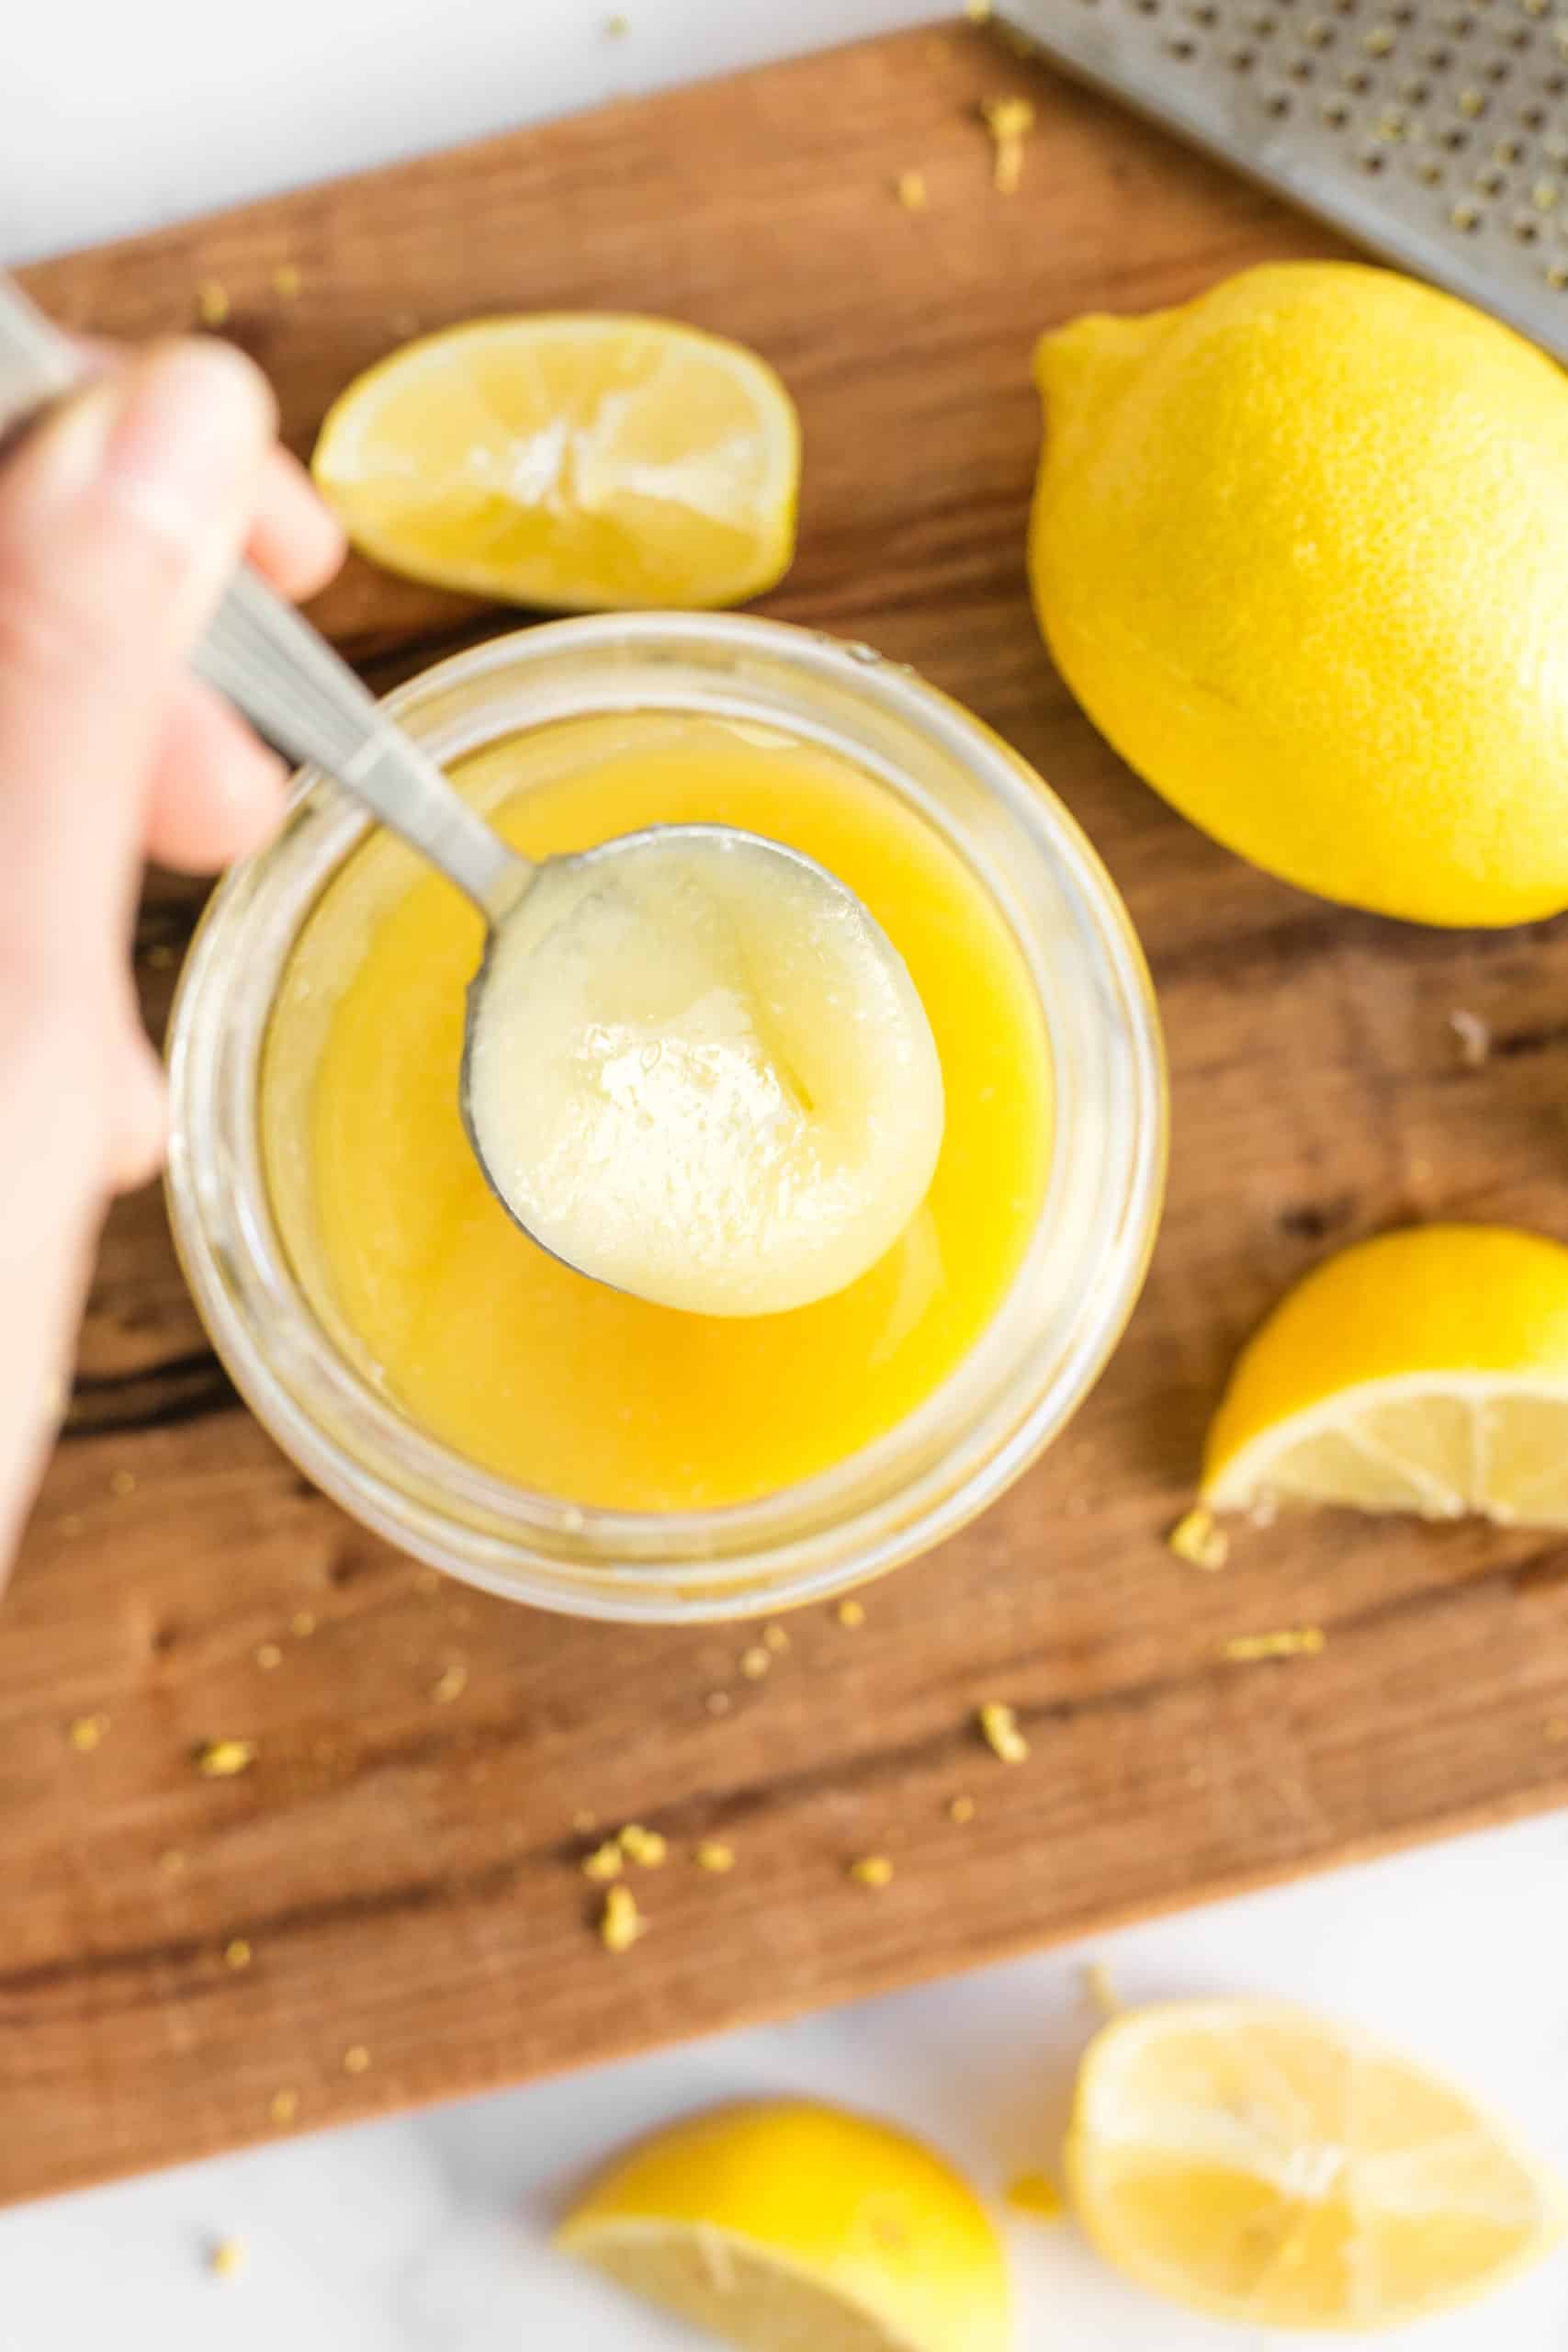 Scooping up a spoonful of freshly made lemon curd.